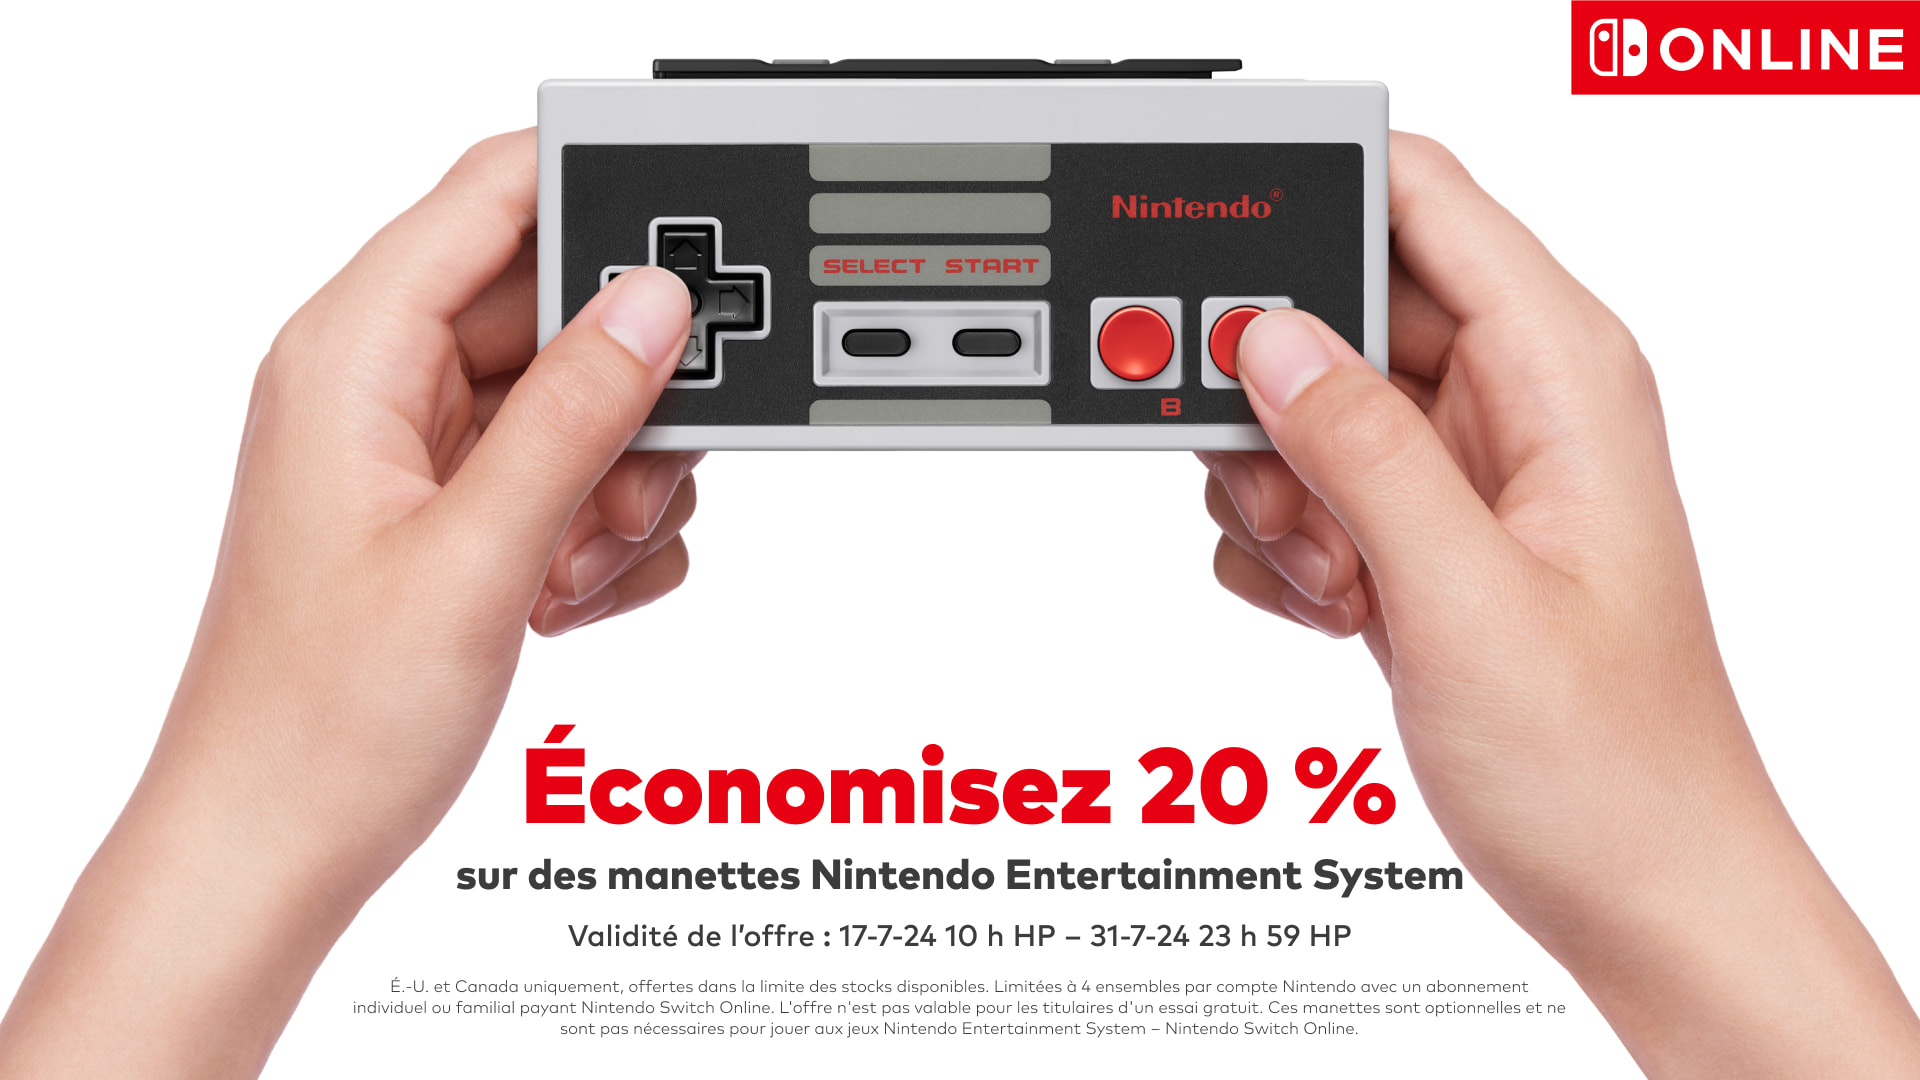 Save 20% on Nintendo Entertainment System Controllers. Offer valid: 10 AM PT 7/17/24 - 11:59 PM PT 7/31/24. US and Canada only. Limit 4 per Nintendo Account with paid NSO membership